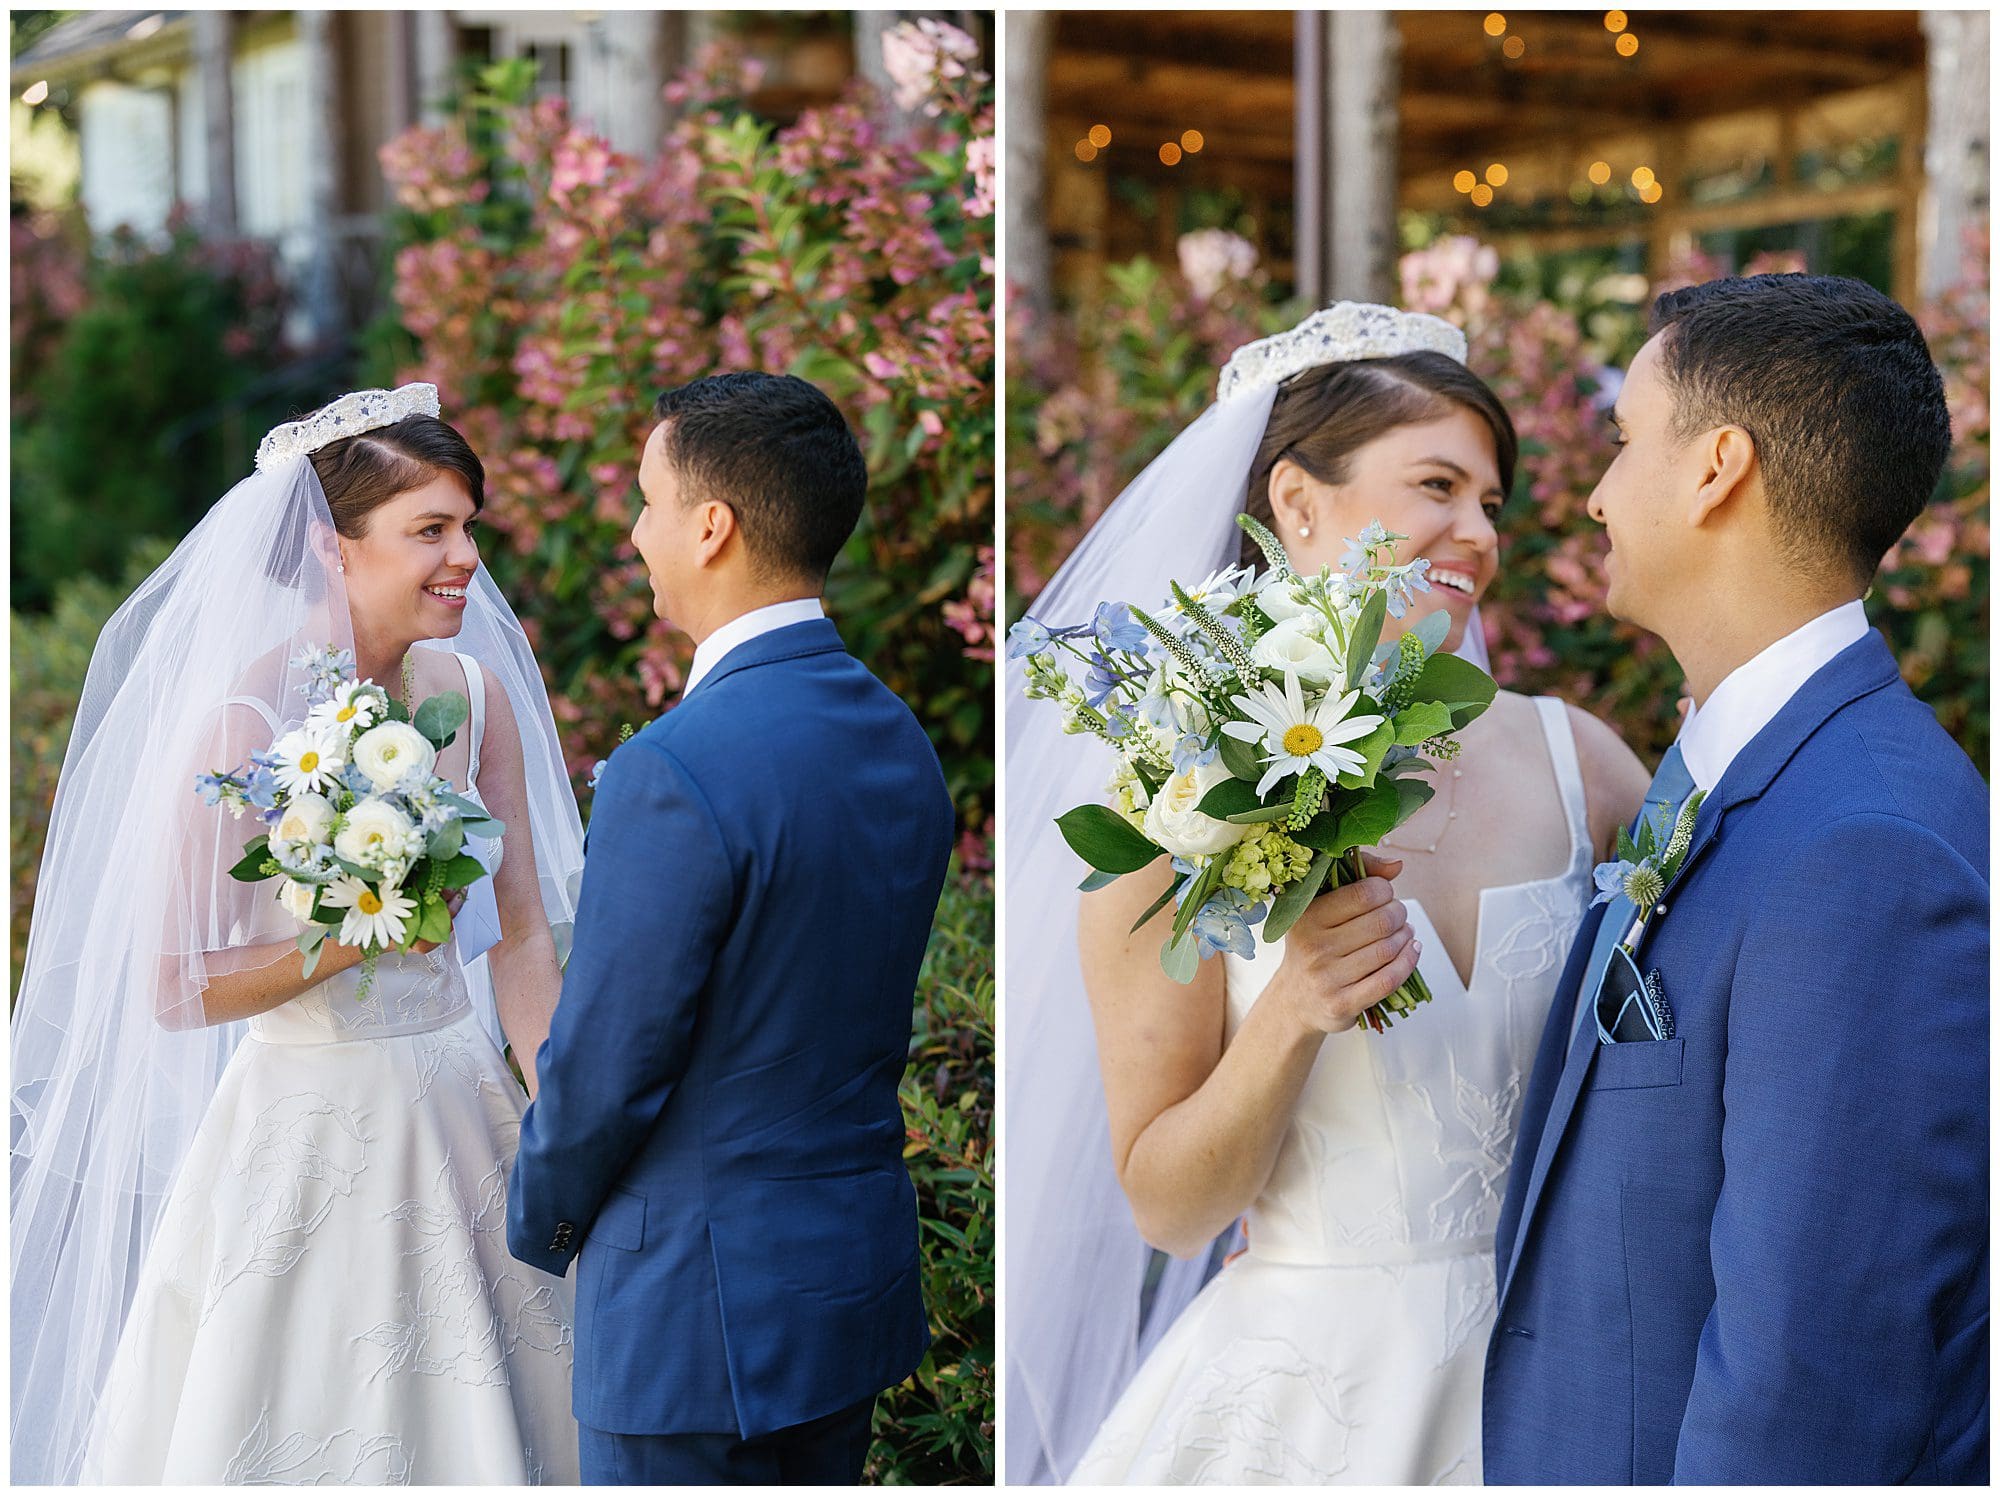 A bride and groom smiling at each other in front of a flower garden.